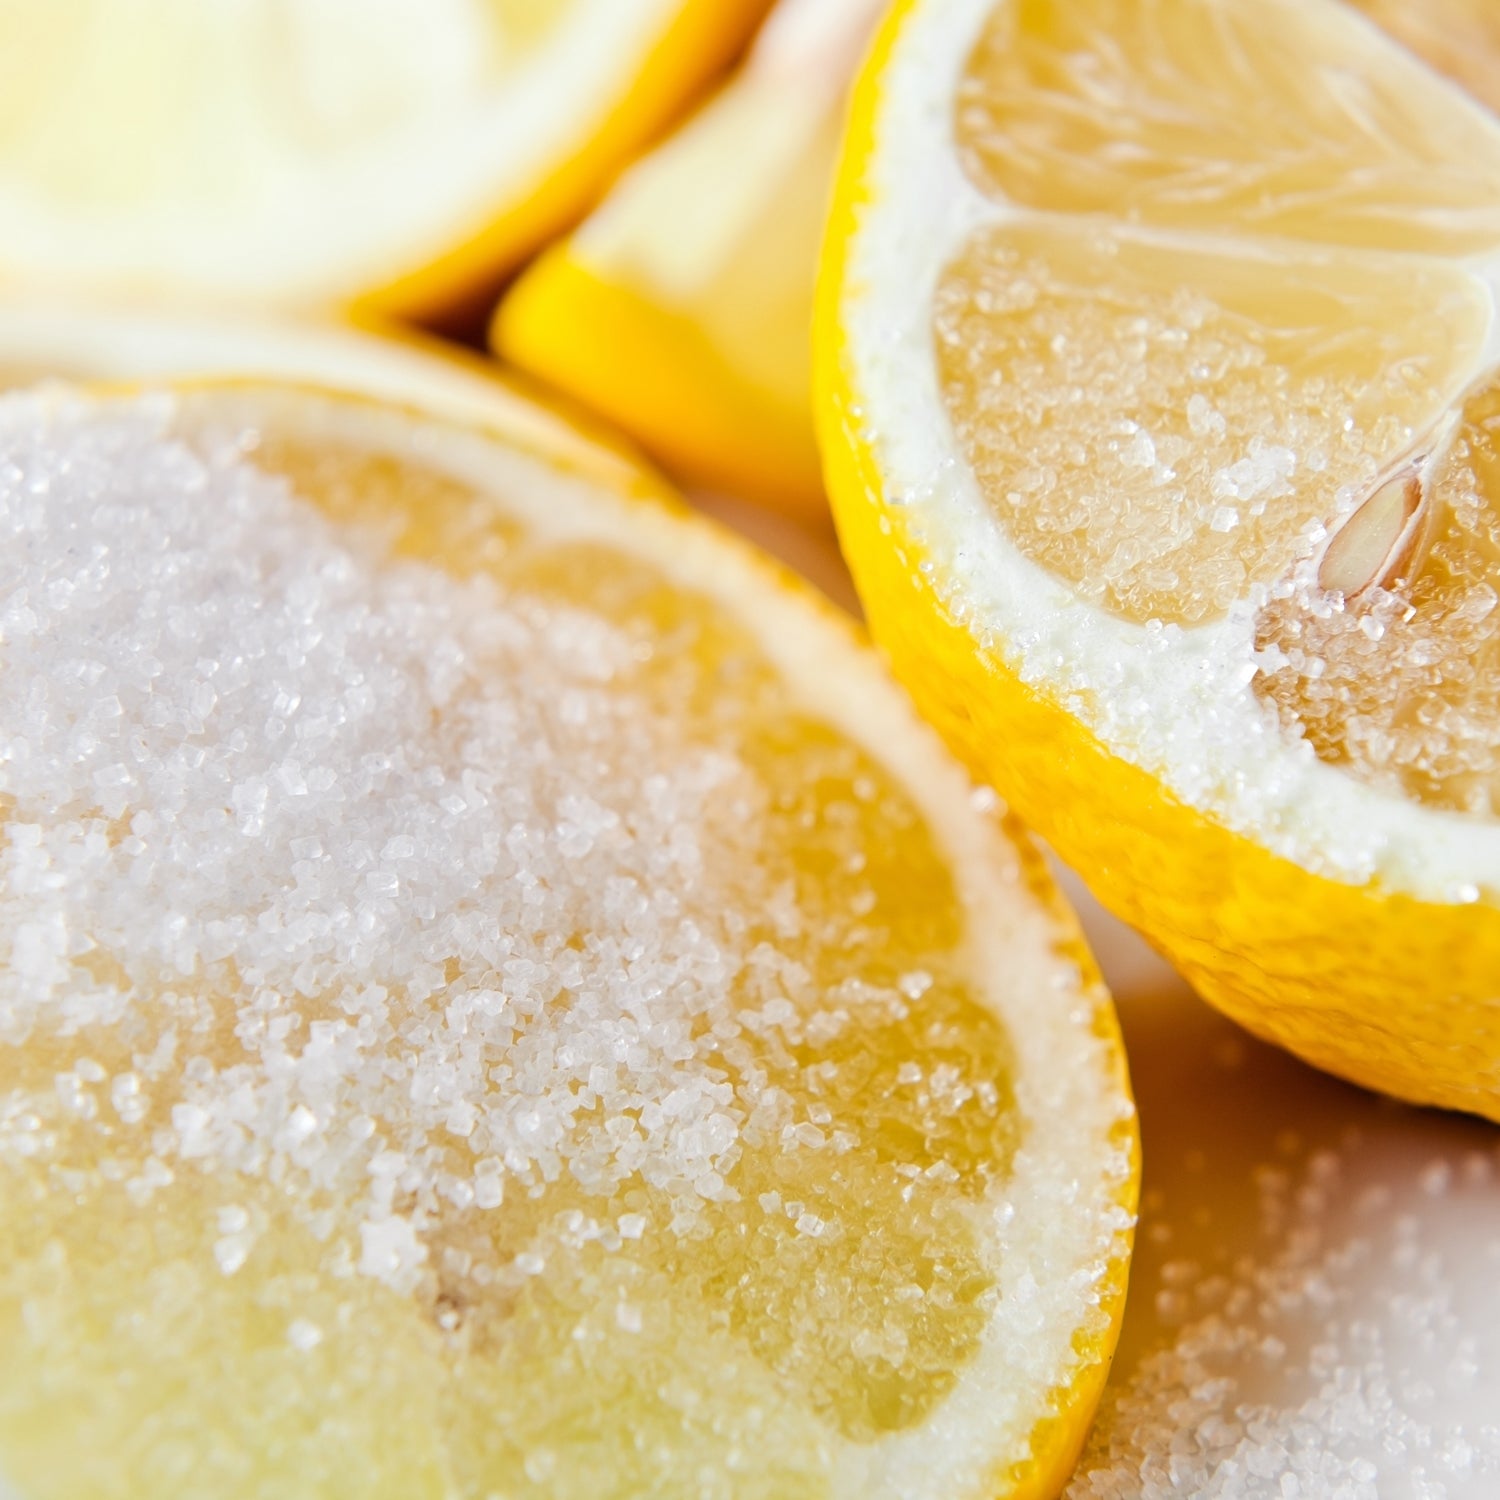 A closeup of sugared lemon wheels - the inspiration for Lemon Sugar, a bright, refreshing scented cnadle from Tuscany Candle's Serene Clean® collection of odor-destroying scented candles